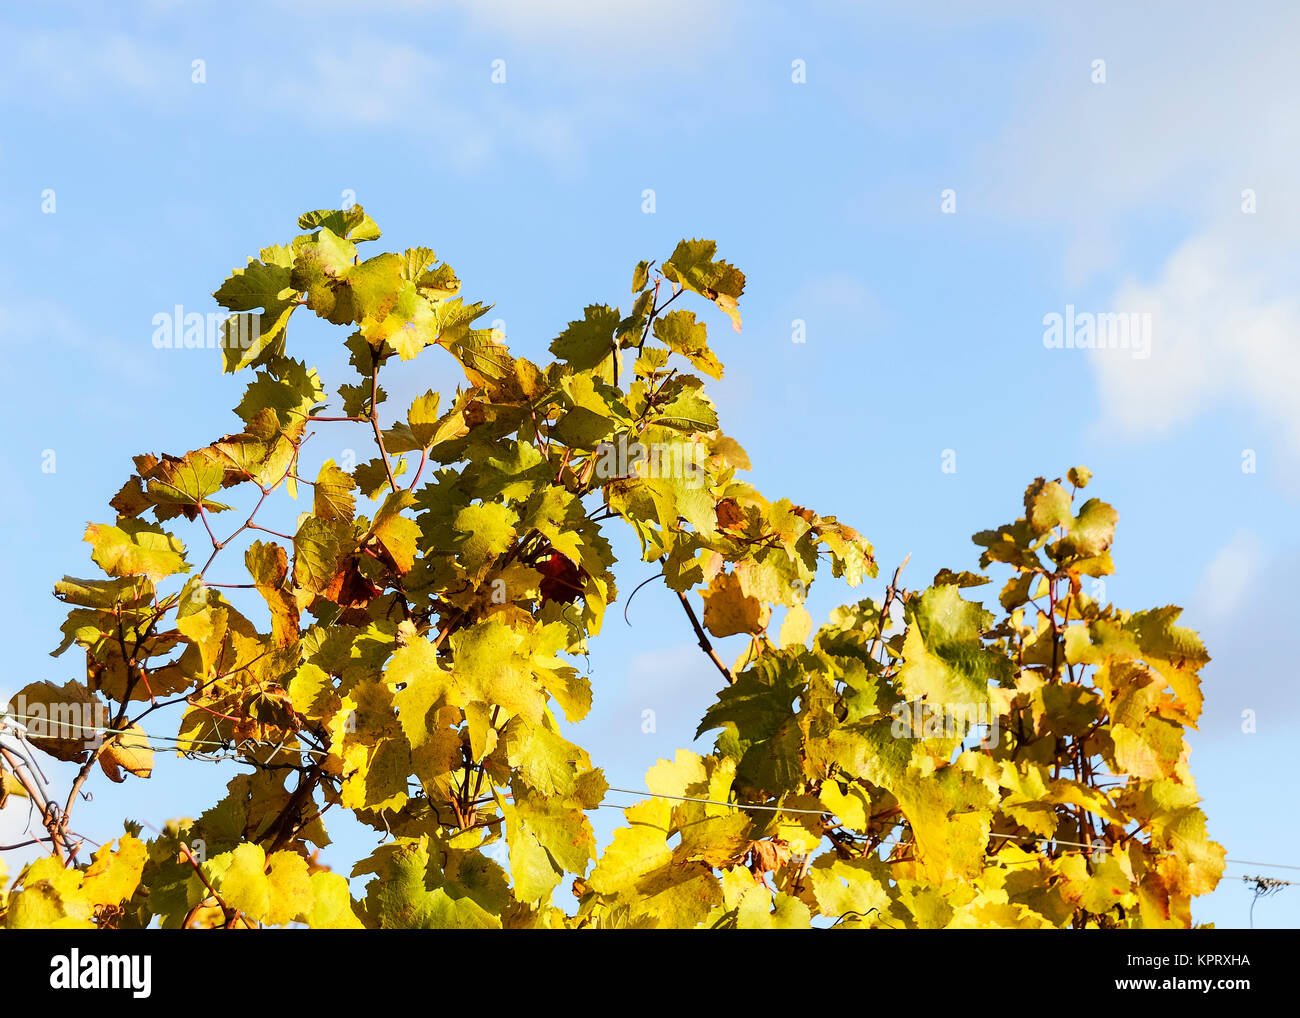 Foliage in the vineyard in autumn with blue sky Stock Photo